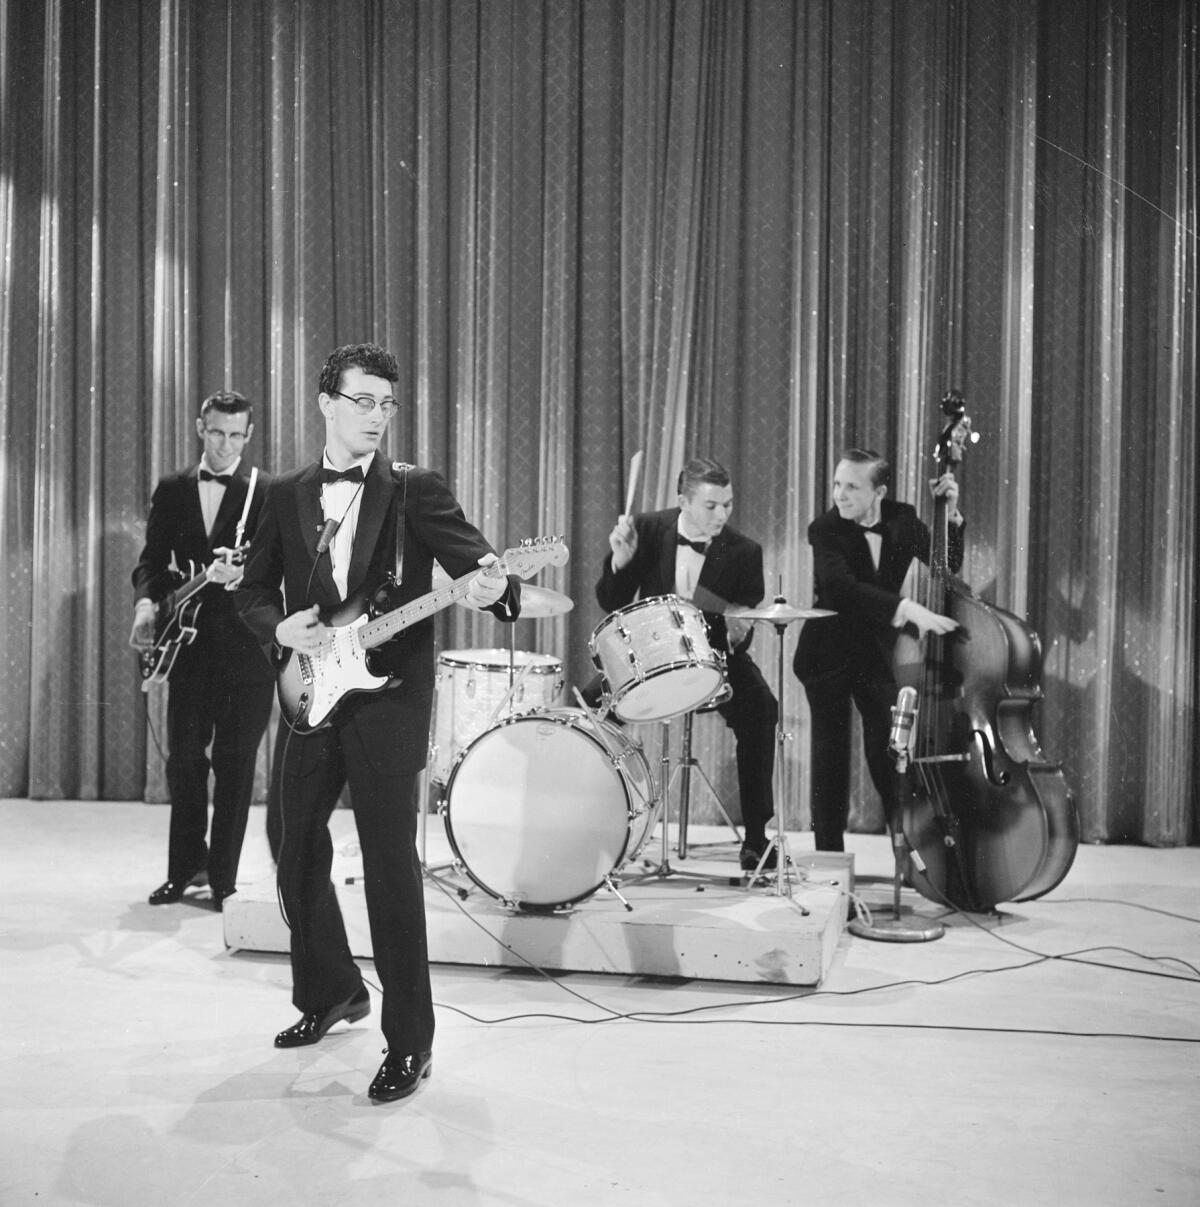 A four-man combo, with Jerry Allison on drums, performs